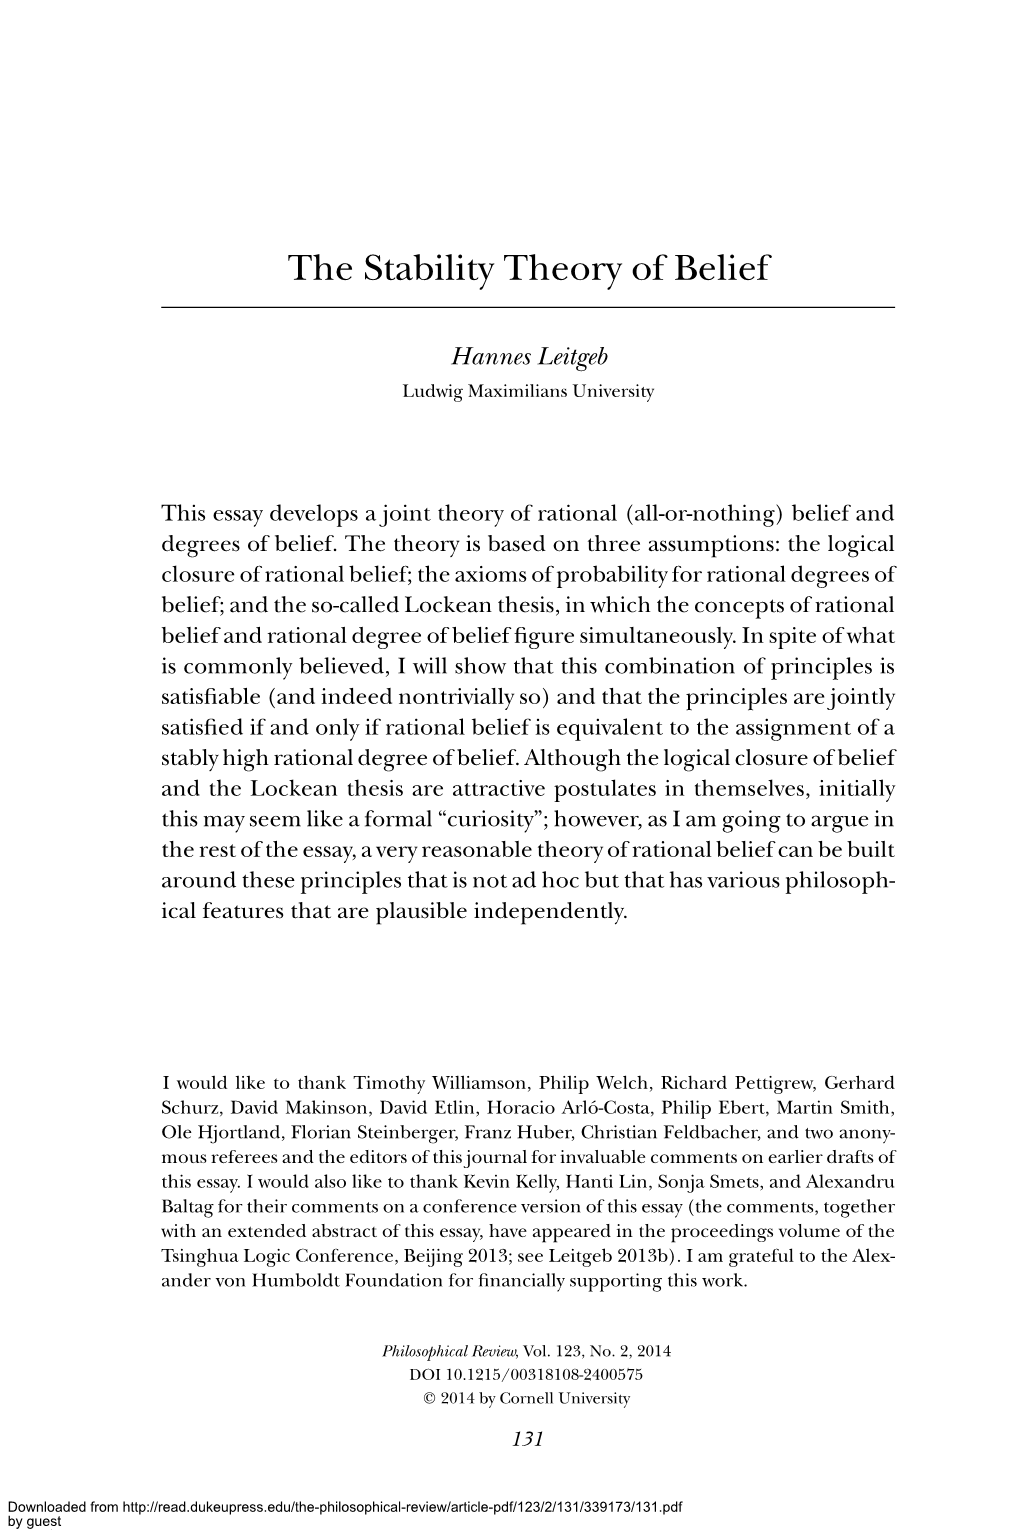 The Stability Theory of Belief